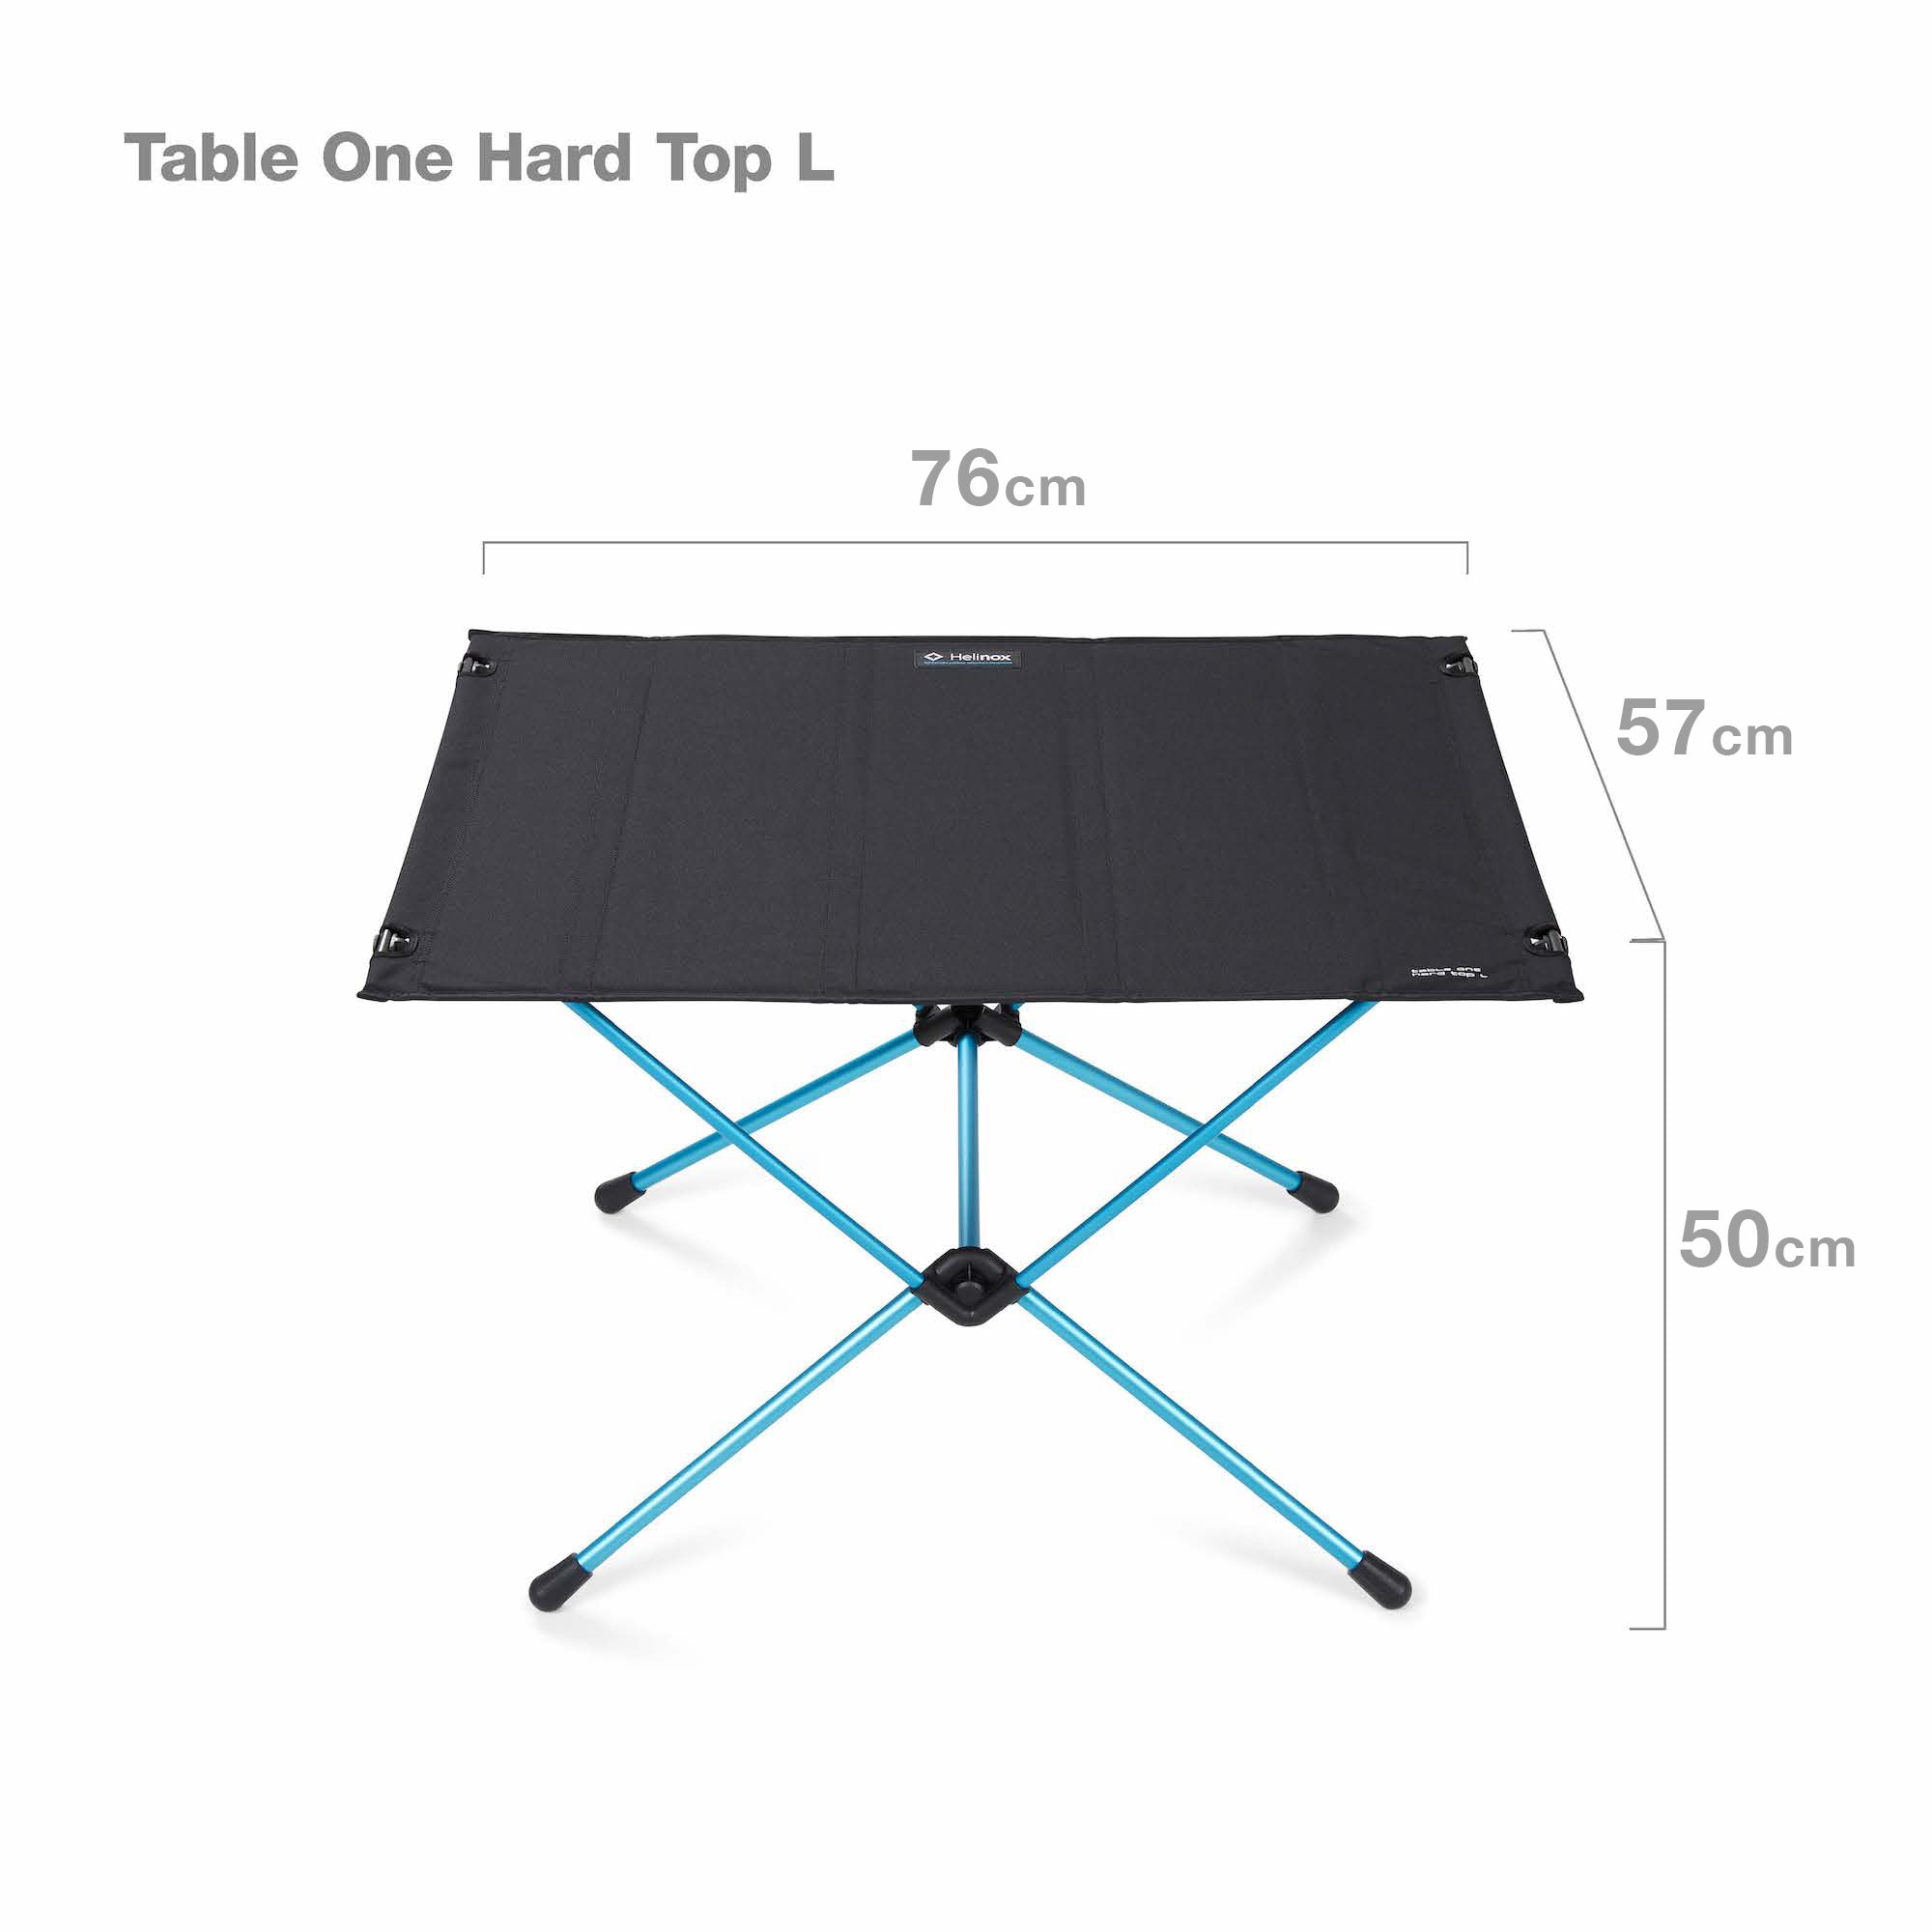 Table One Hard Top L - Black